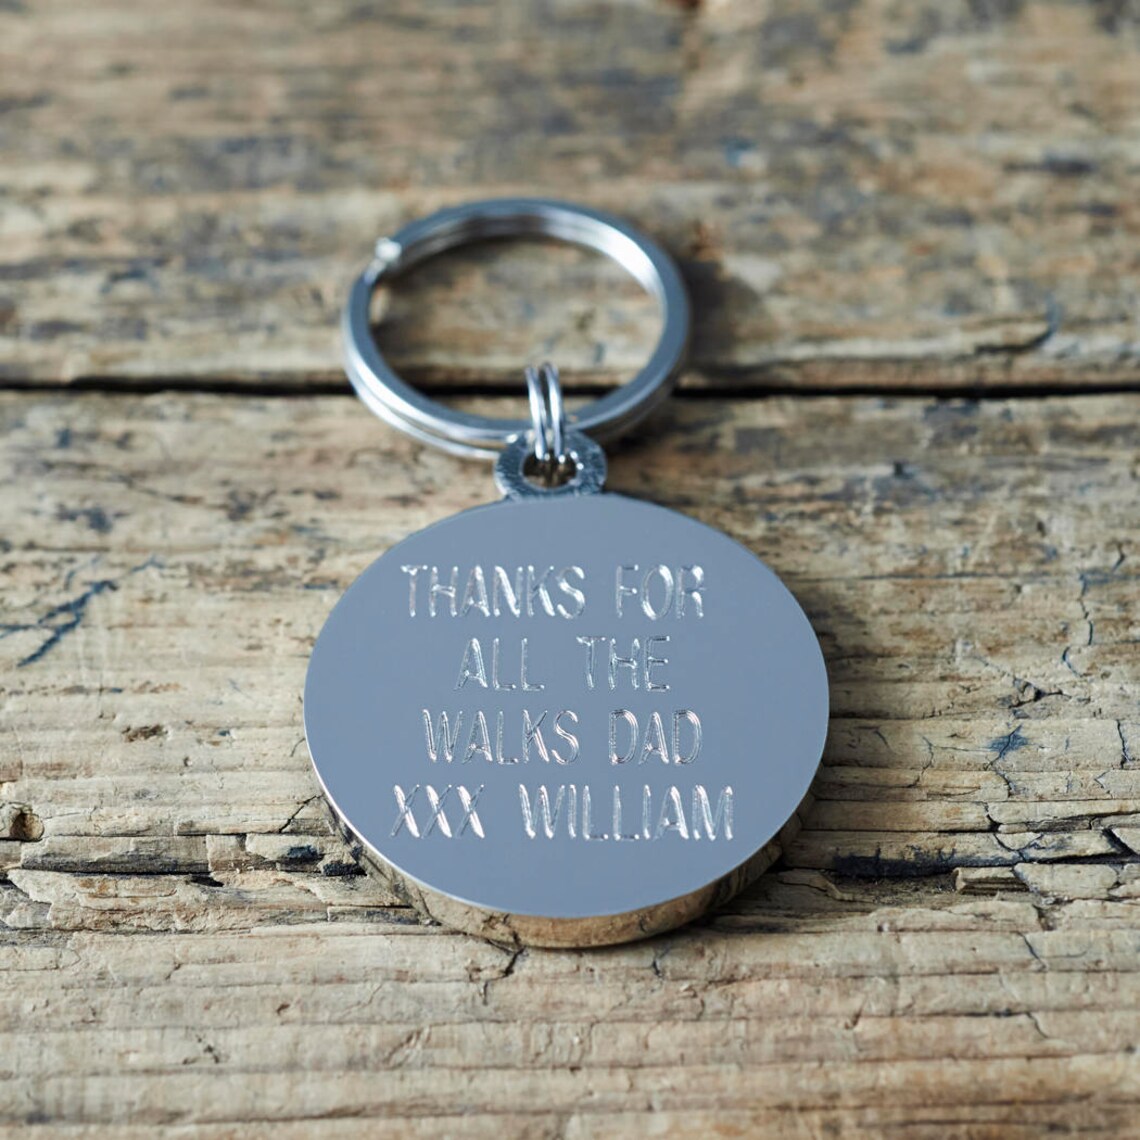 Oh Bugger Im Lost Dog Tag Etsy